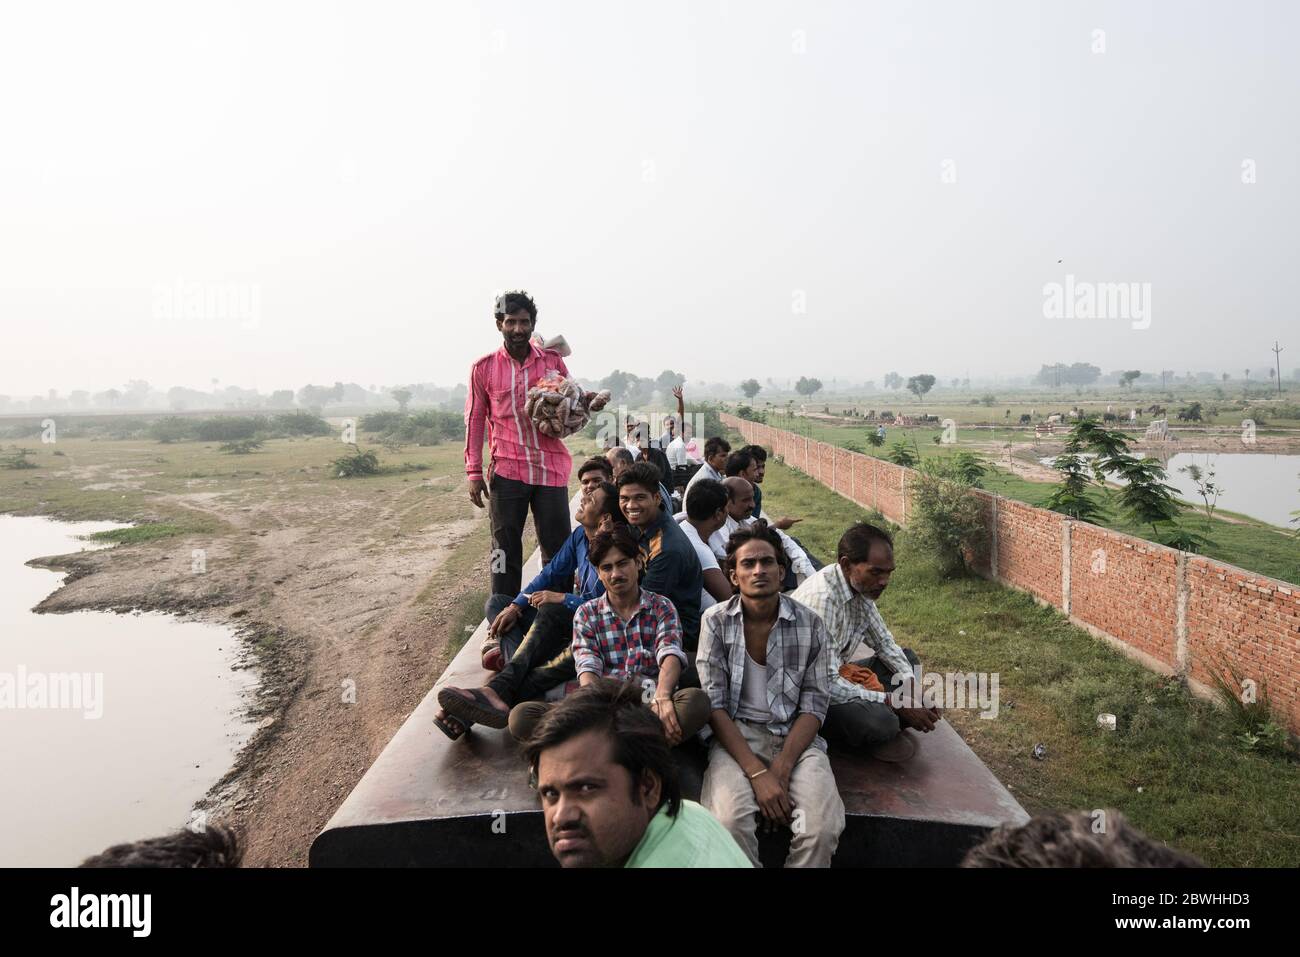 Men on top of overcrowded train passes through a small town in Madhya Pradesh, India. Indian Railways. Stock Photo